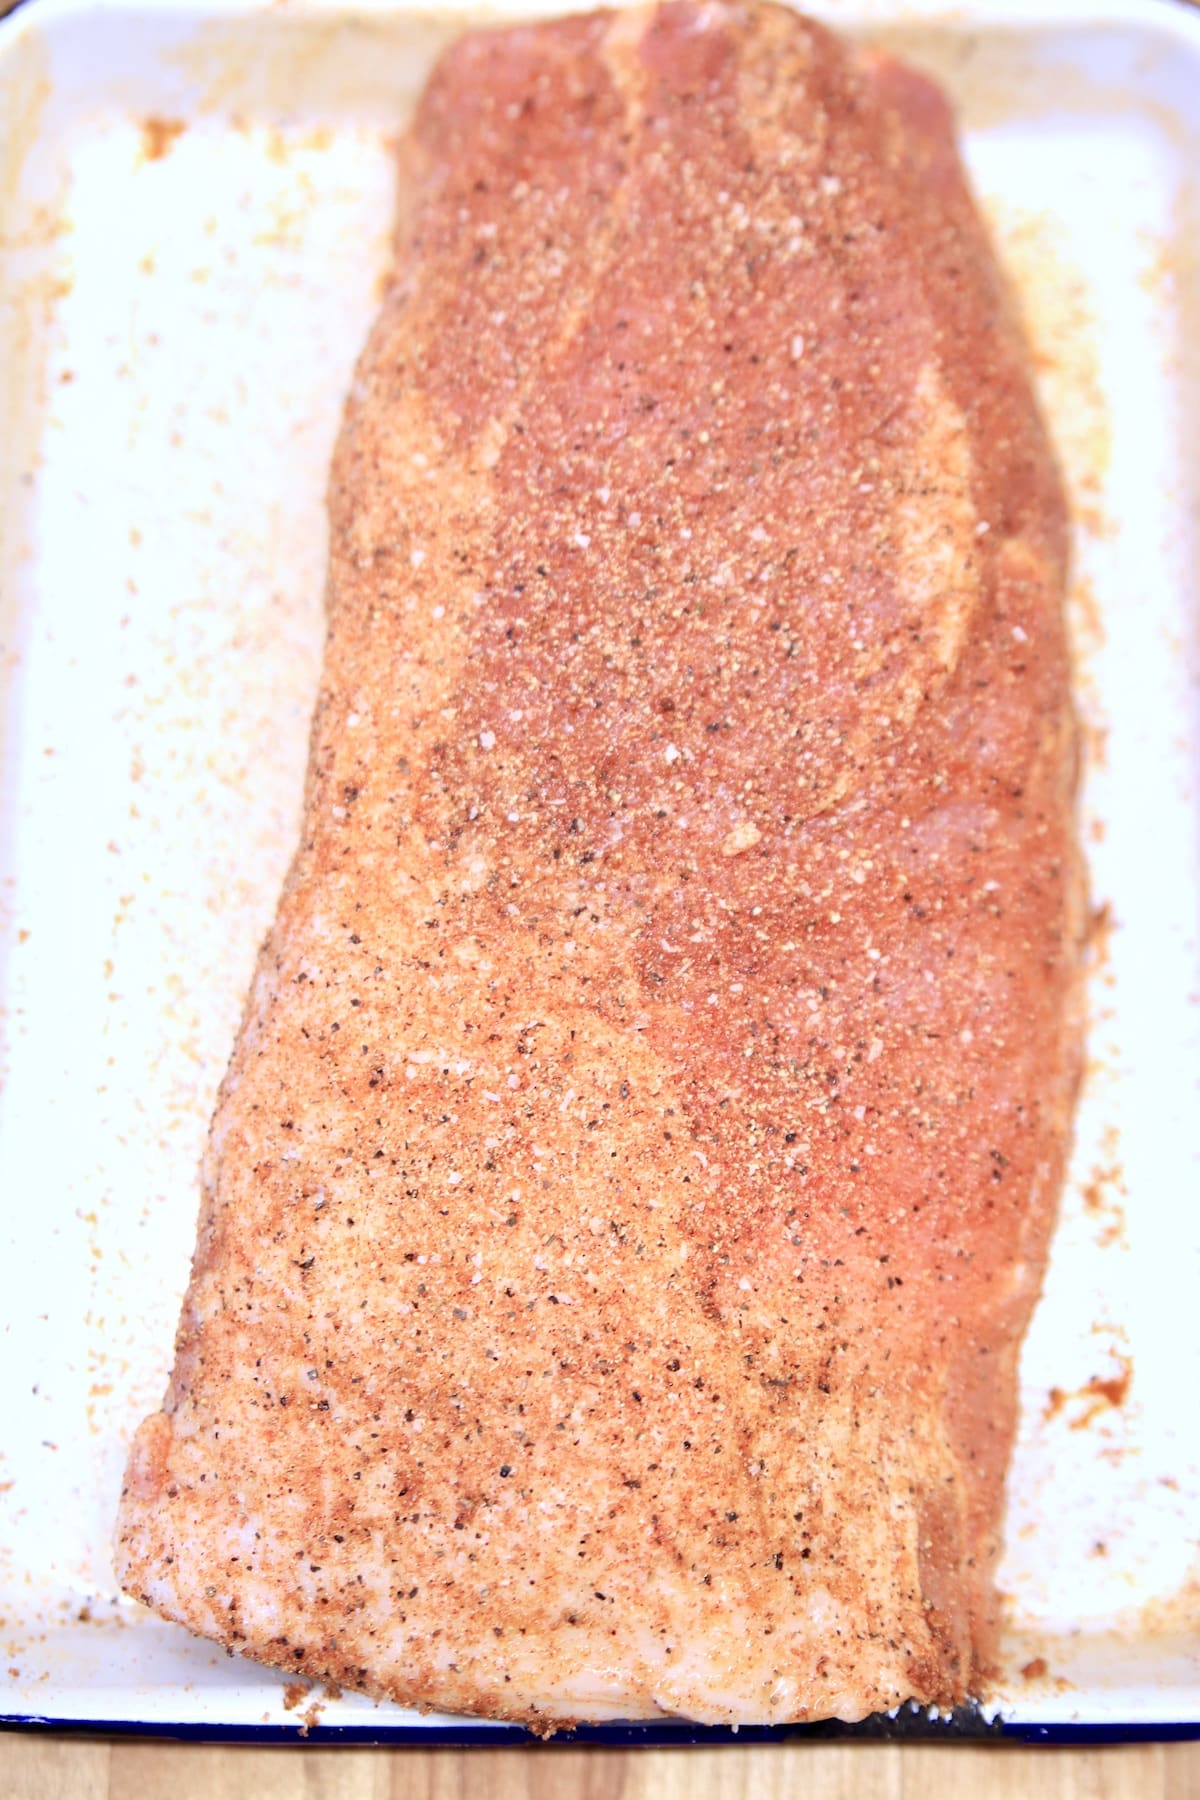 Pork Loin with dry rub ready to grill.